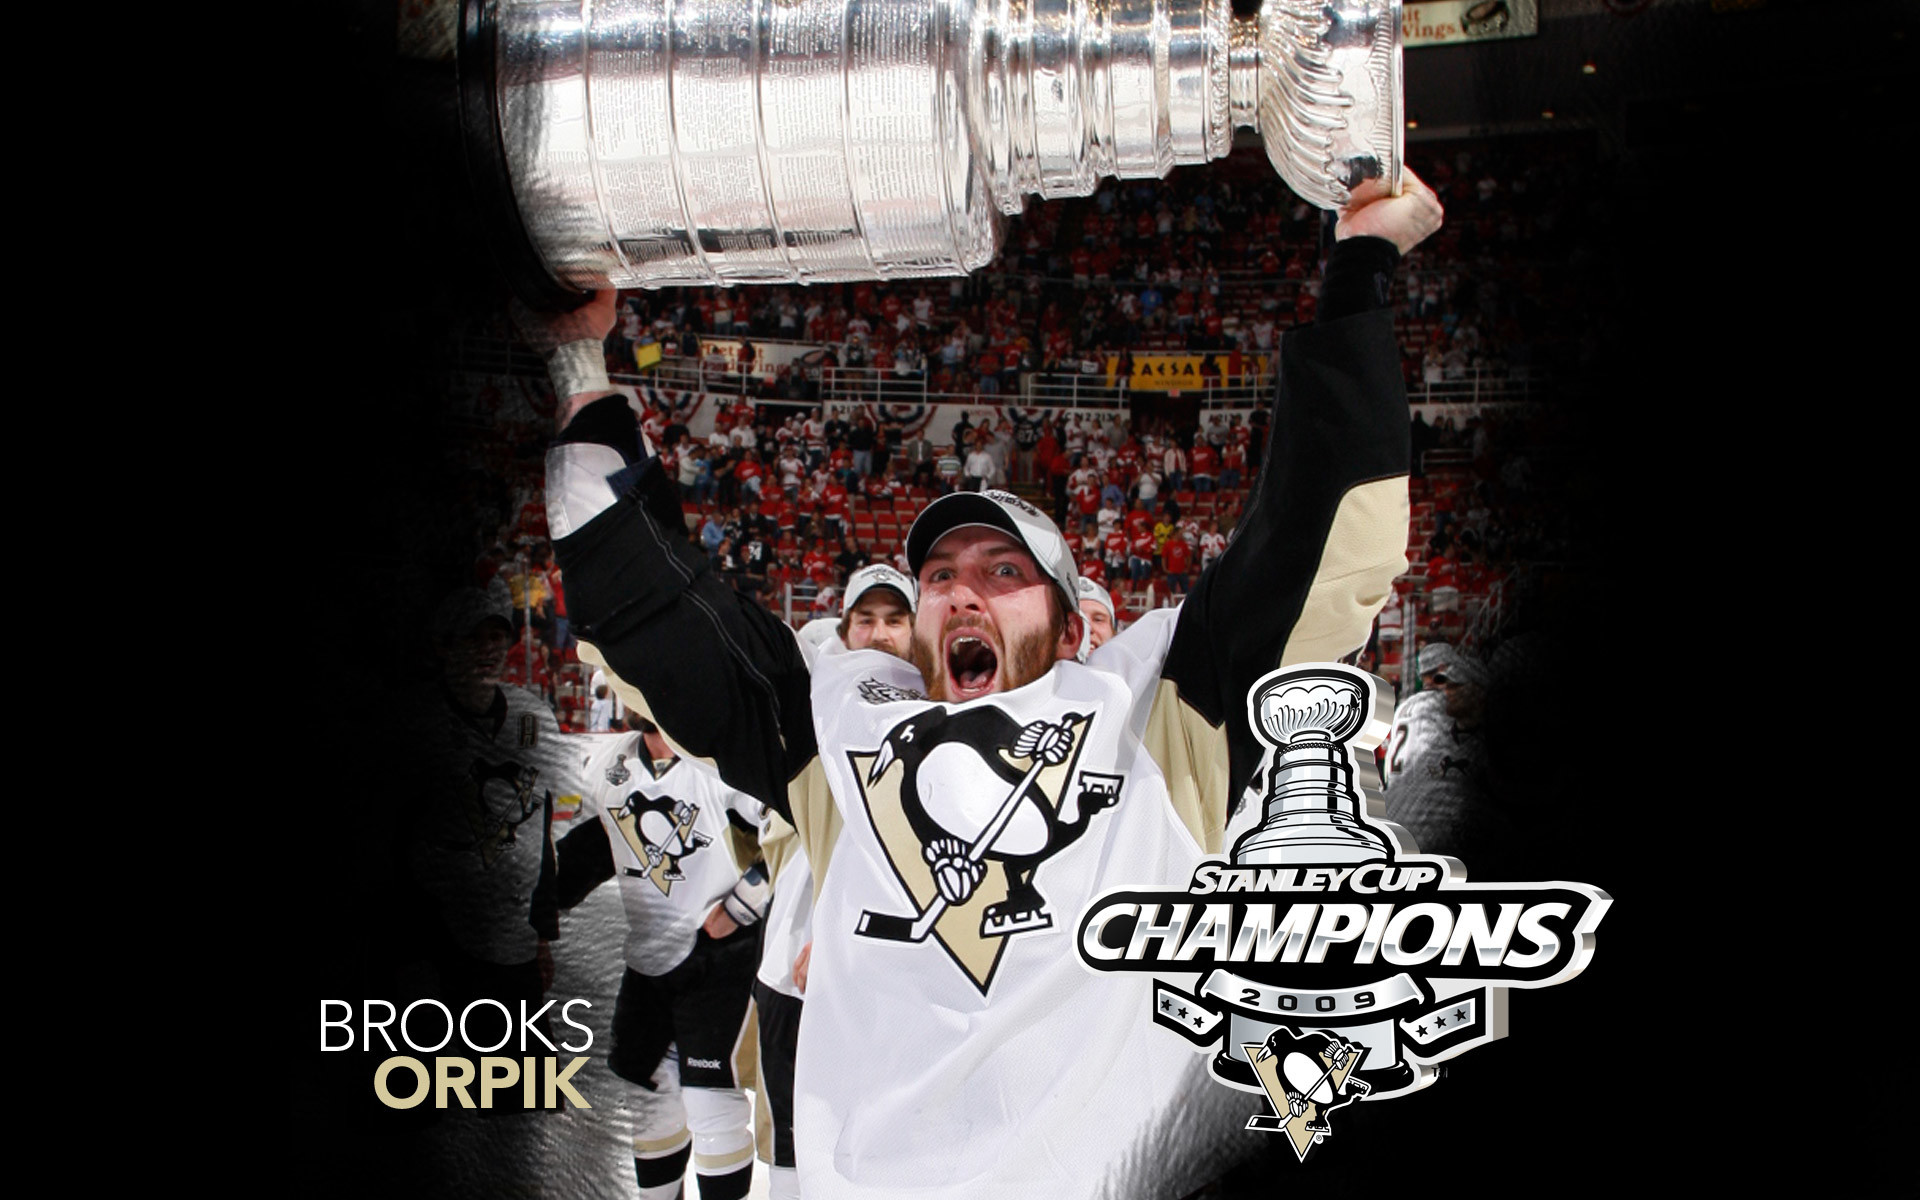 1920x1200 Free Cool Pittsburgh Penguins Stanley Cup Images on your Computer